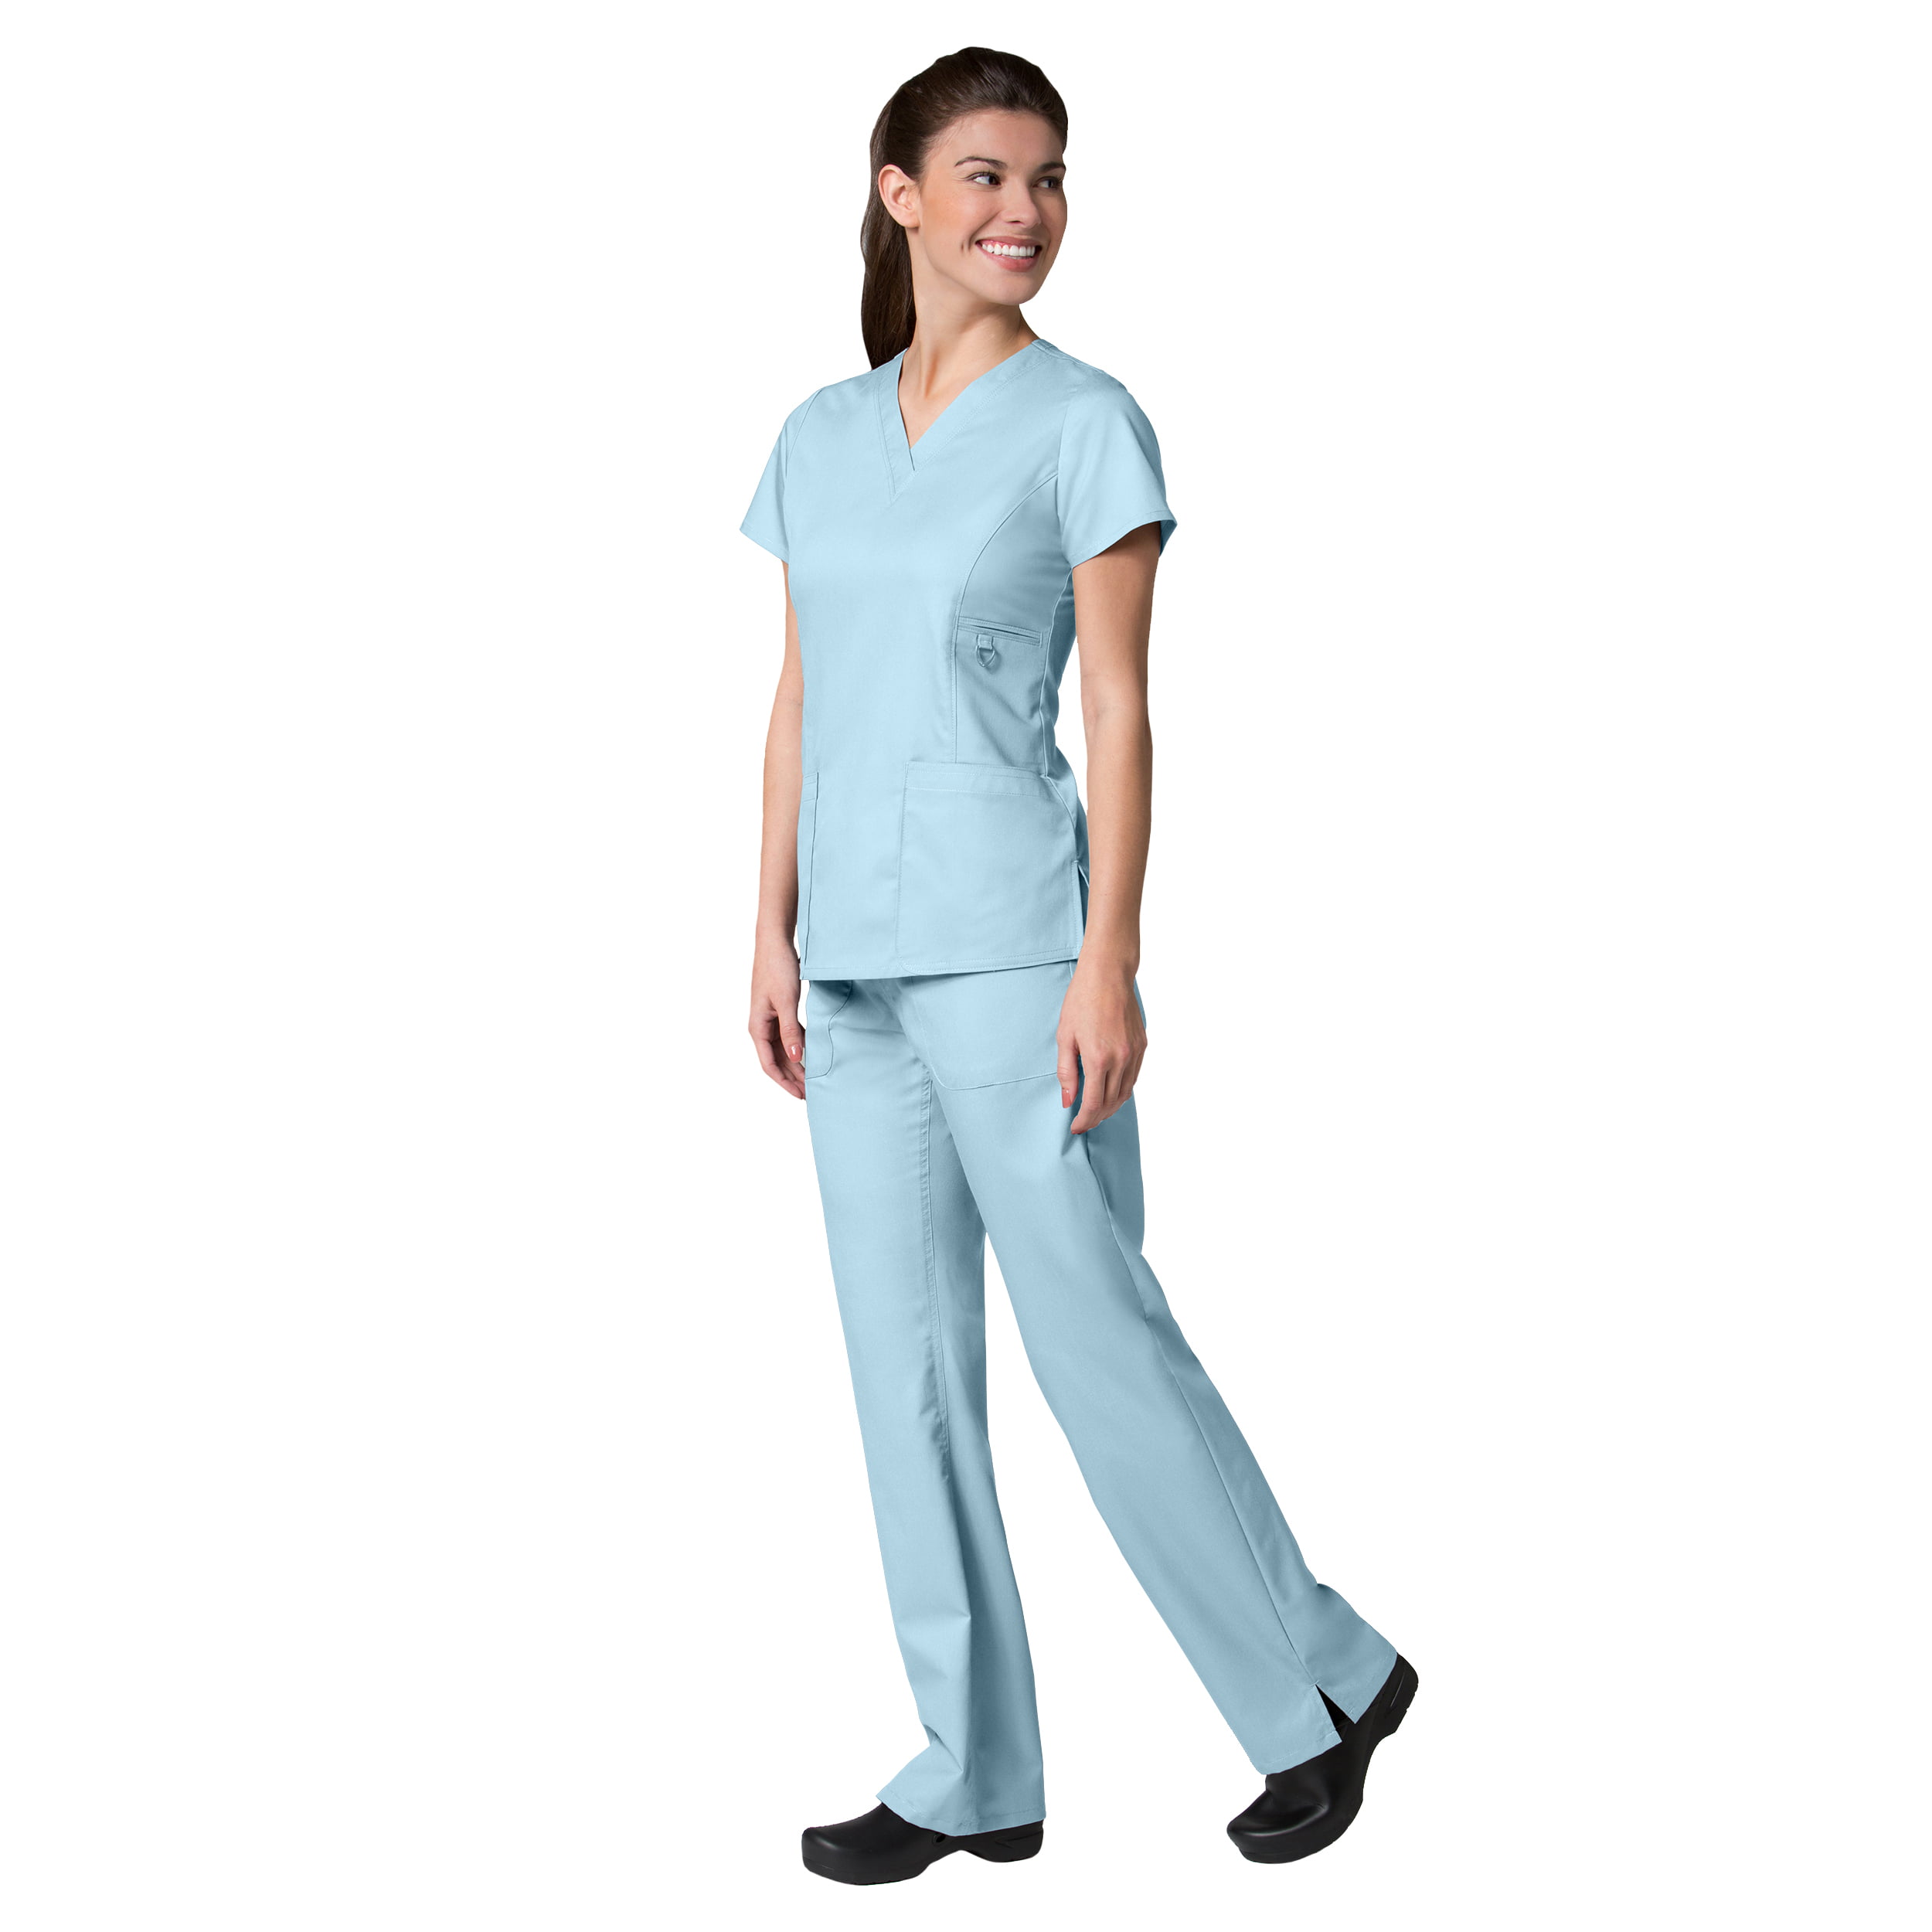 PURE Soft by Maevn Ladies V-Neck Top & Relaxed-Fit Elastic Cargo Pant Scrub Set 